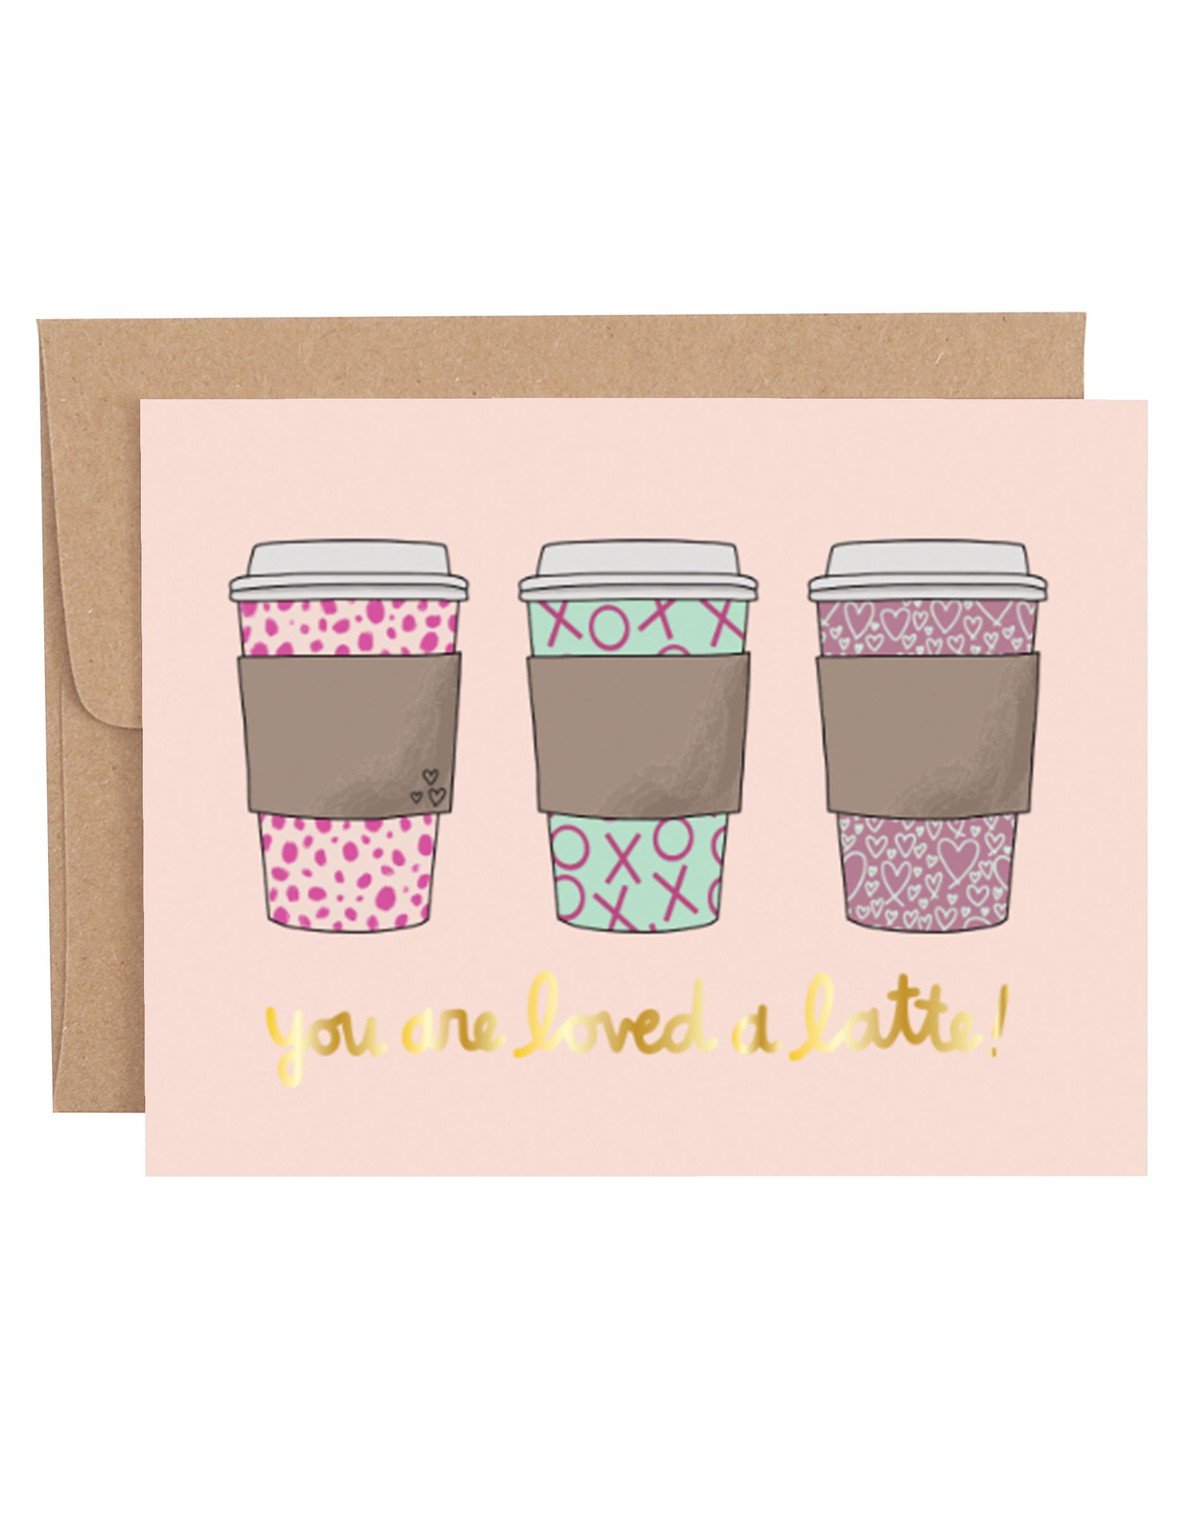 Loved a Latte Greeting Card item